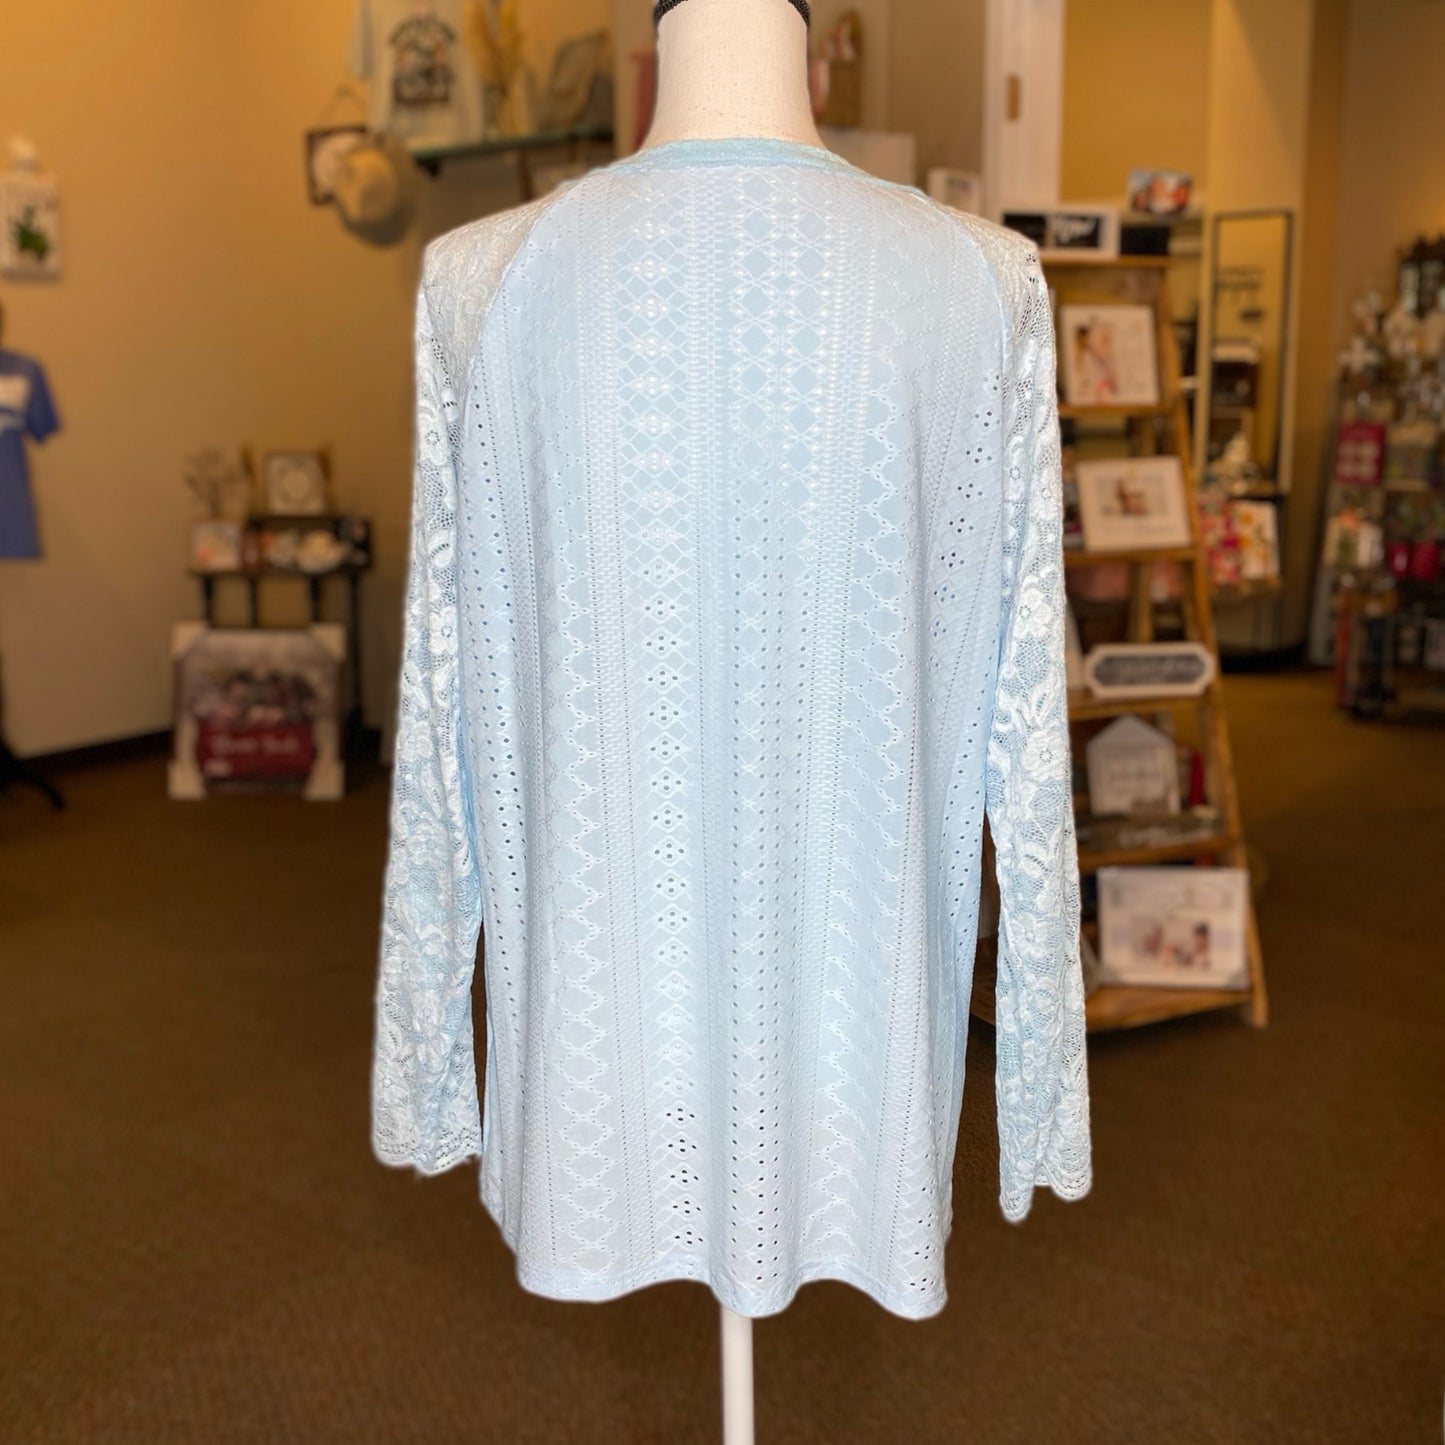 Baby Blue Eyelet & Lace Top - Size XXL